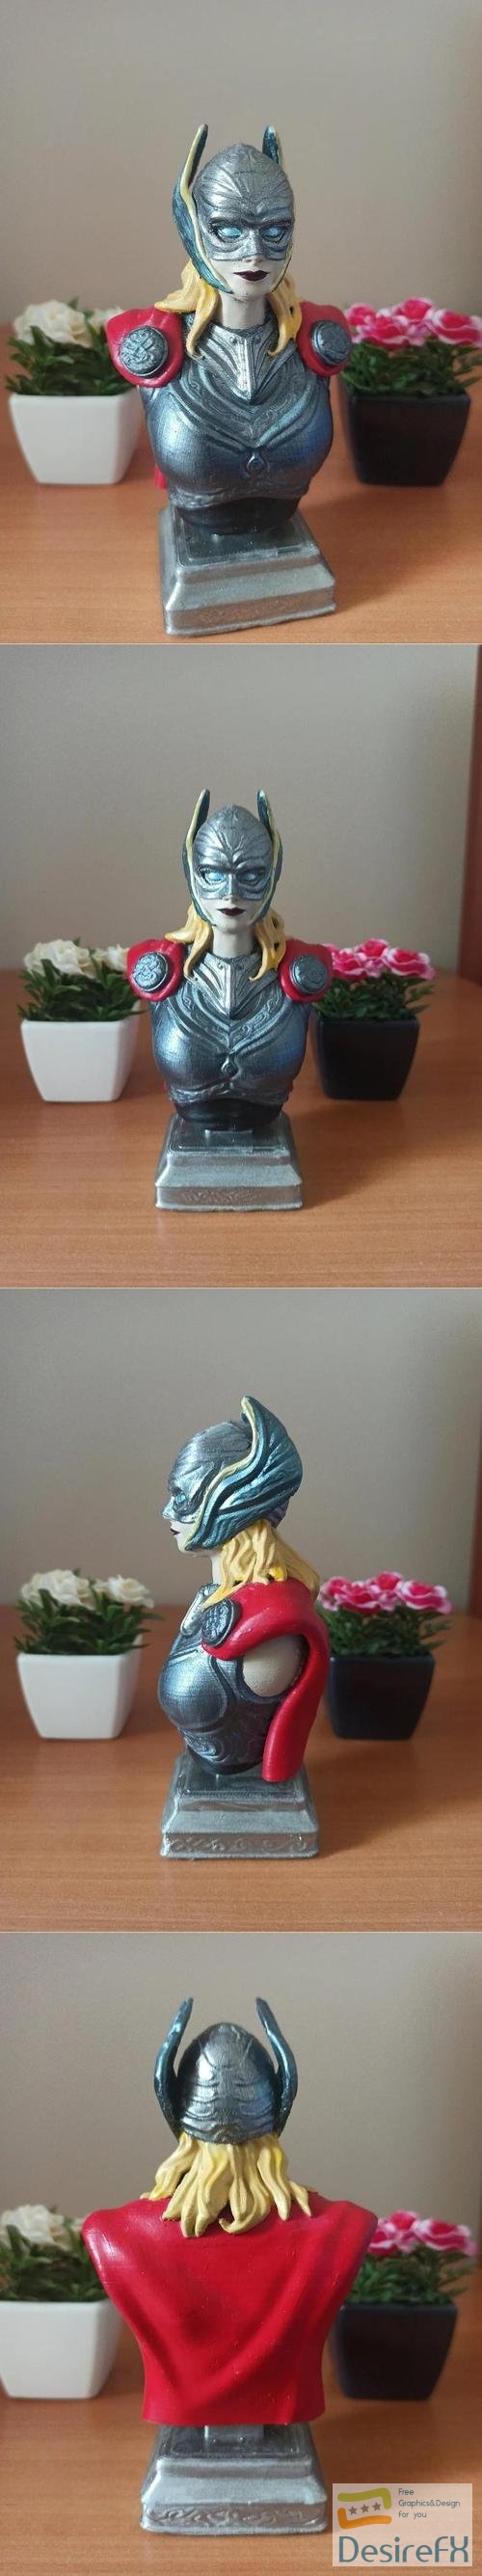 Lady Thor Bust Jane Foster She Thor Avengers – 3D Print